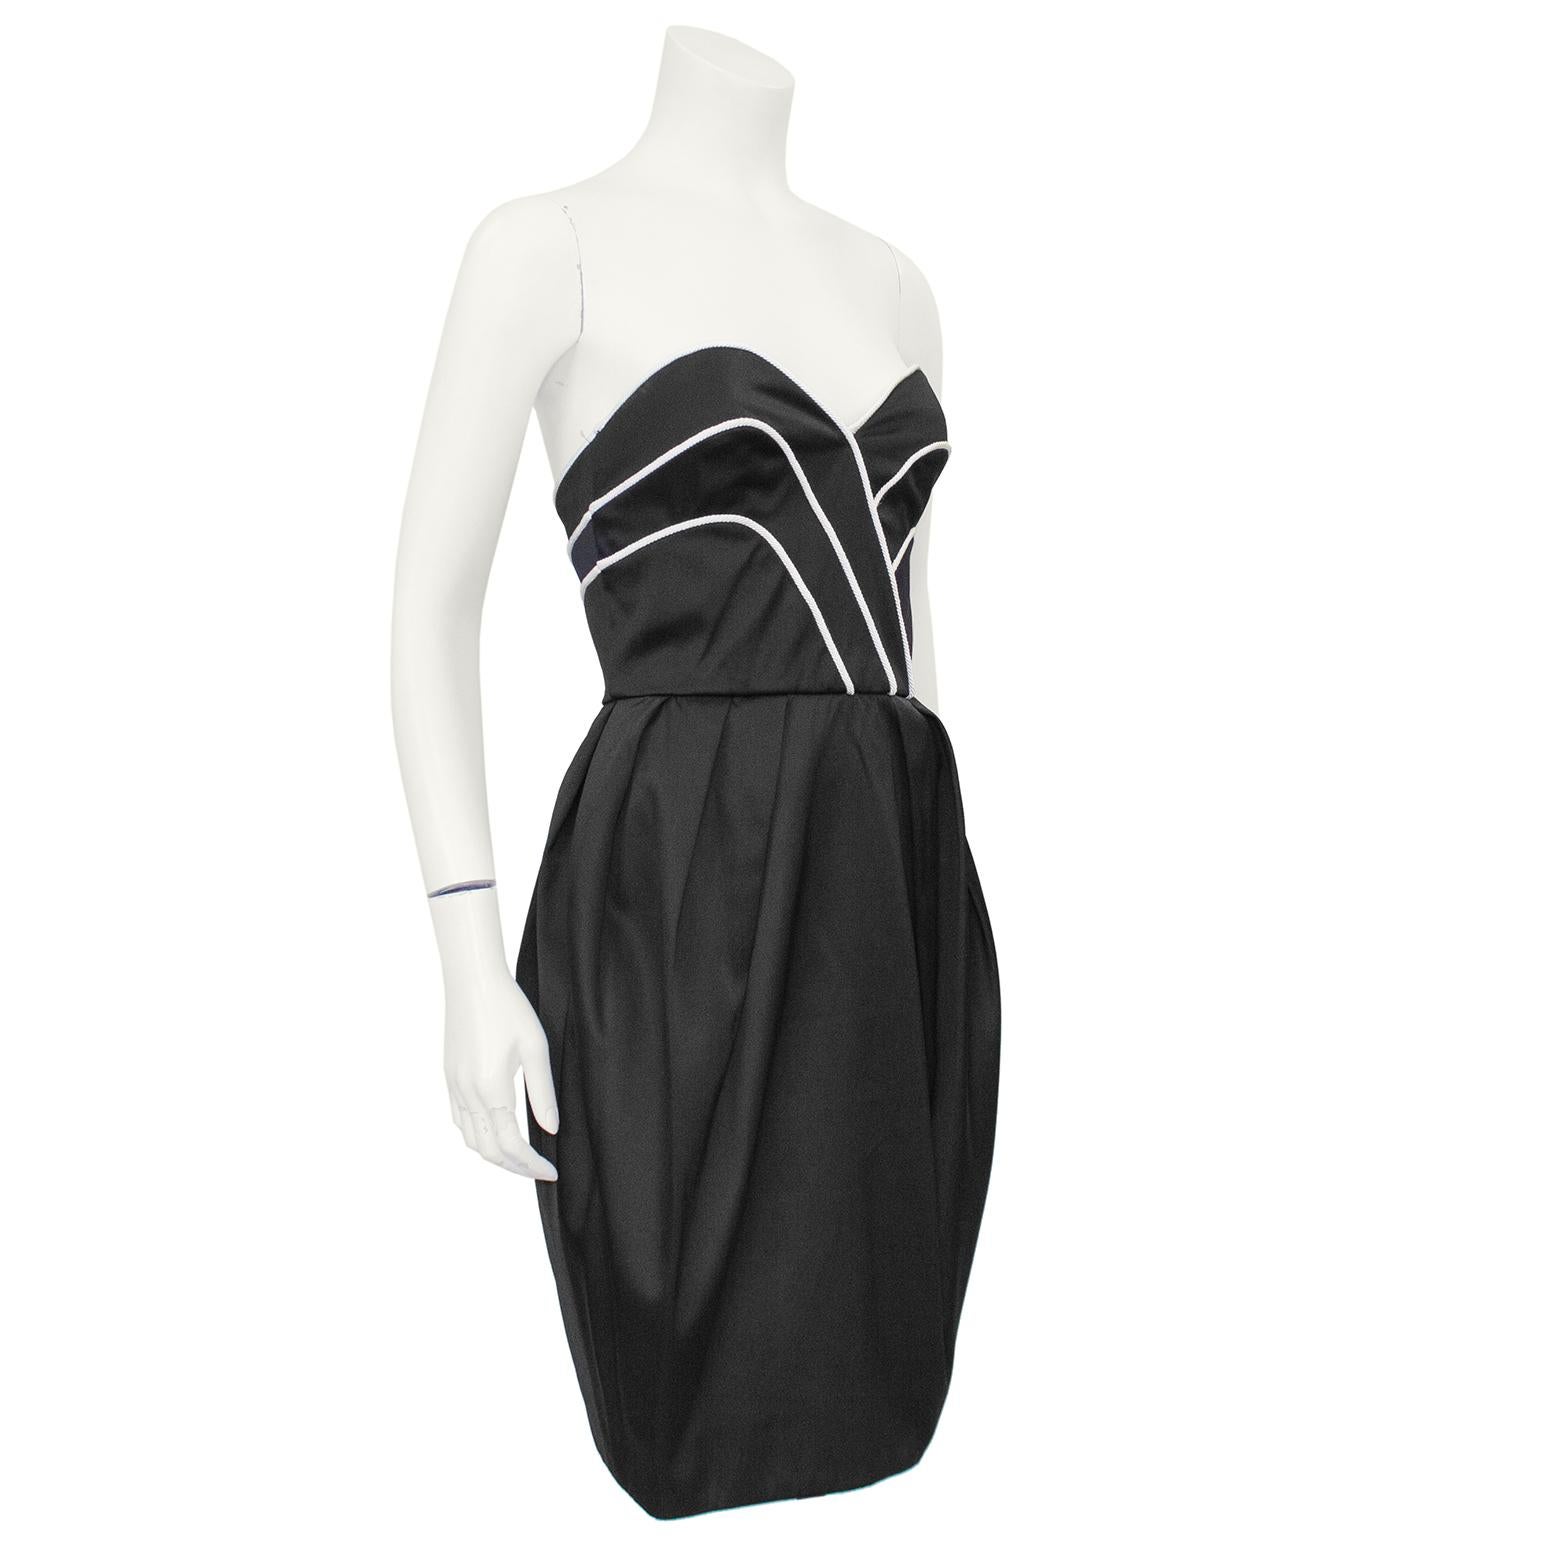 Timeless Lanvin black satin strapless cocktail dress from the 1980s. The sweetheart neckline and upper bodice are trimmed with a cream rope detail that accentuates the natural curve of the bustline. The bubble style skirt is achieved with inverted